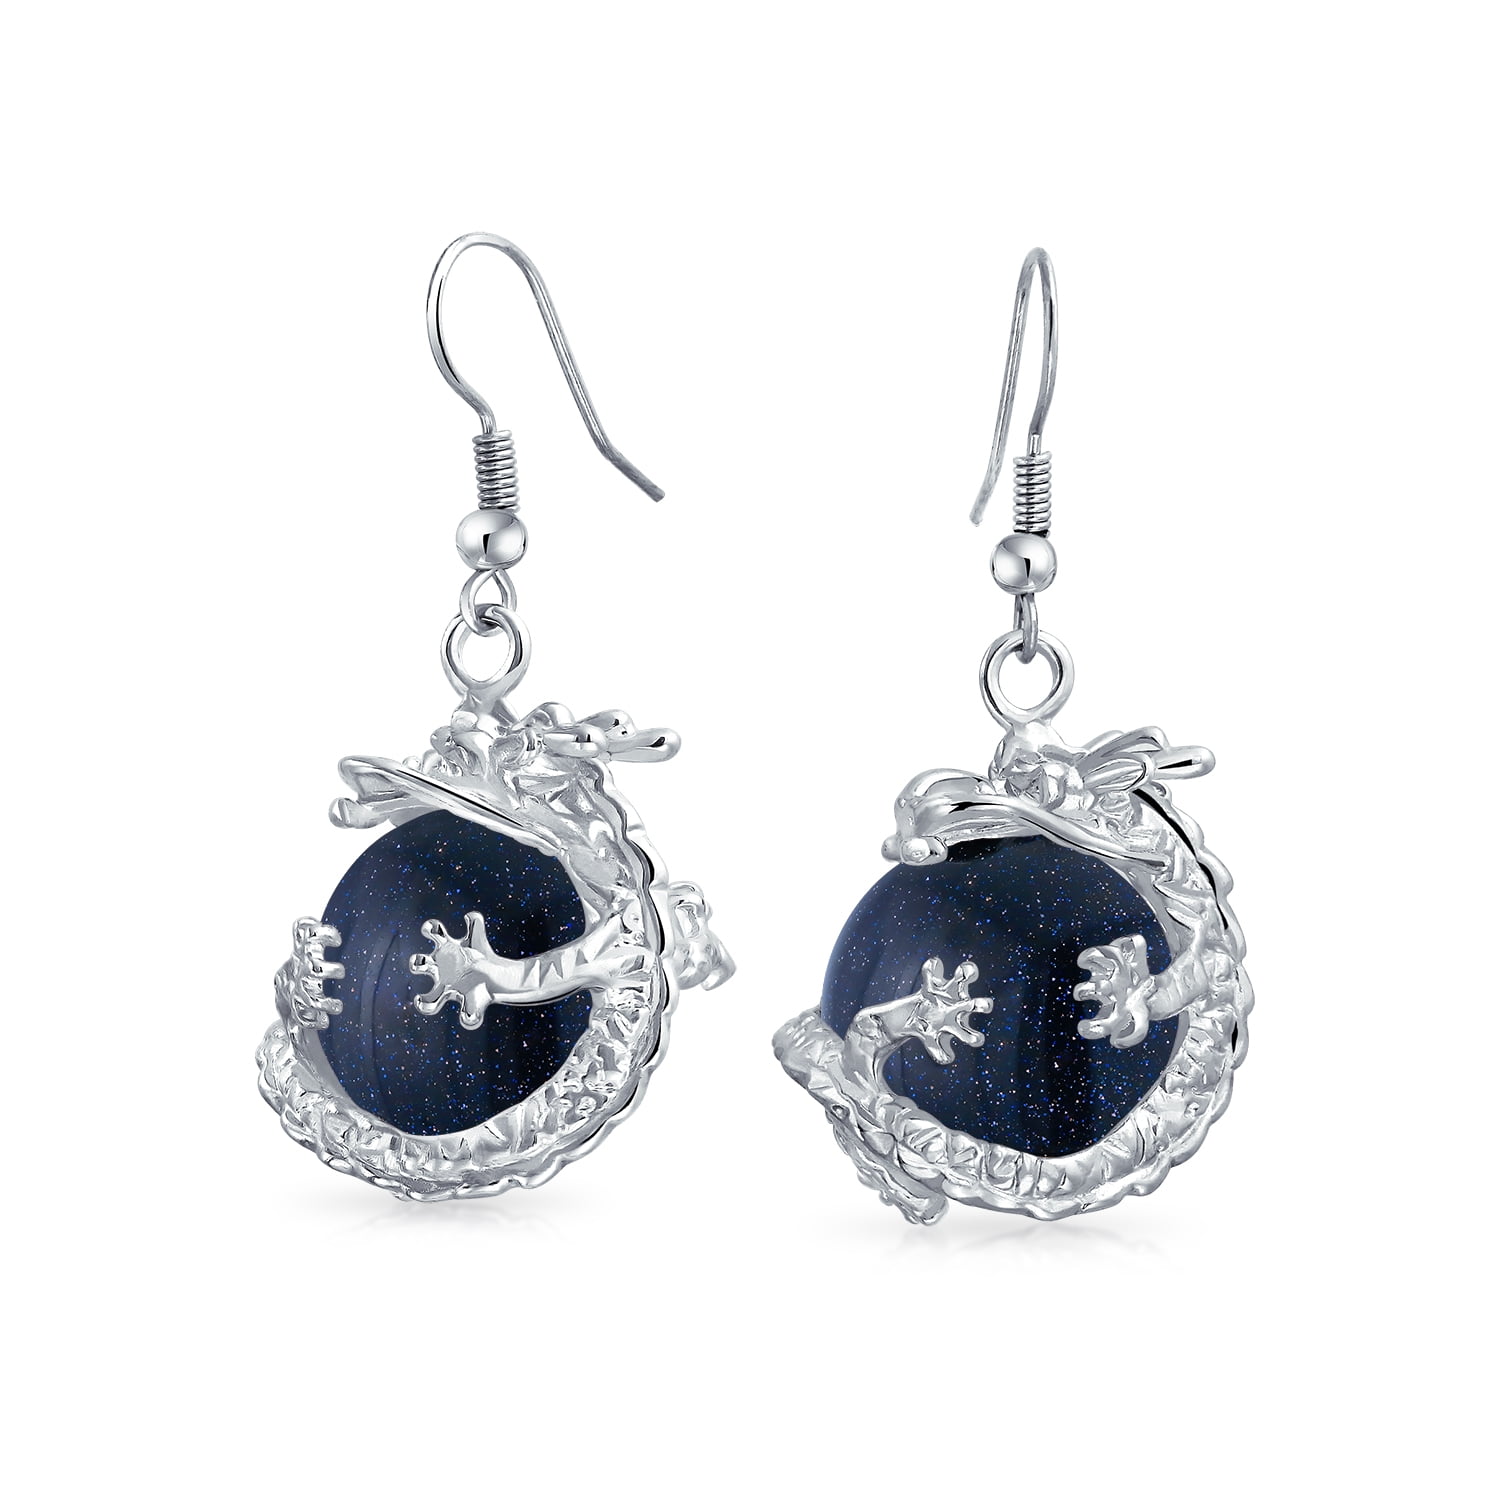 Metallic Crystal Celestial Blue Goldstone Round Ball Dangle Wrapped Orb Chinese Asian Dragon Earrings for Women Teen